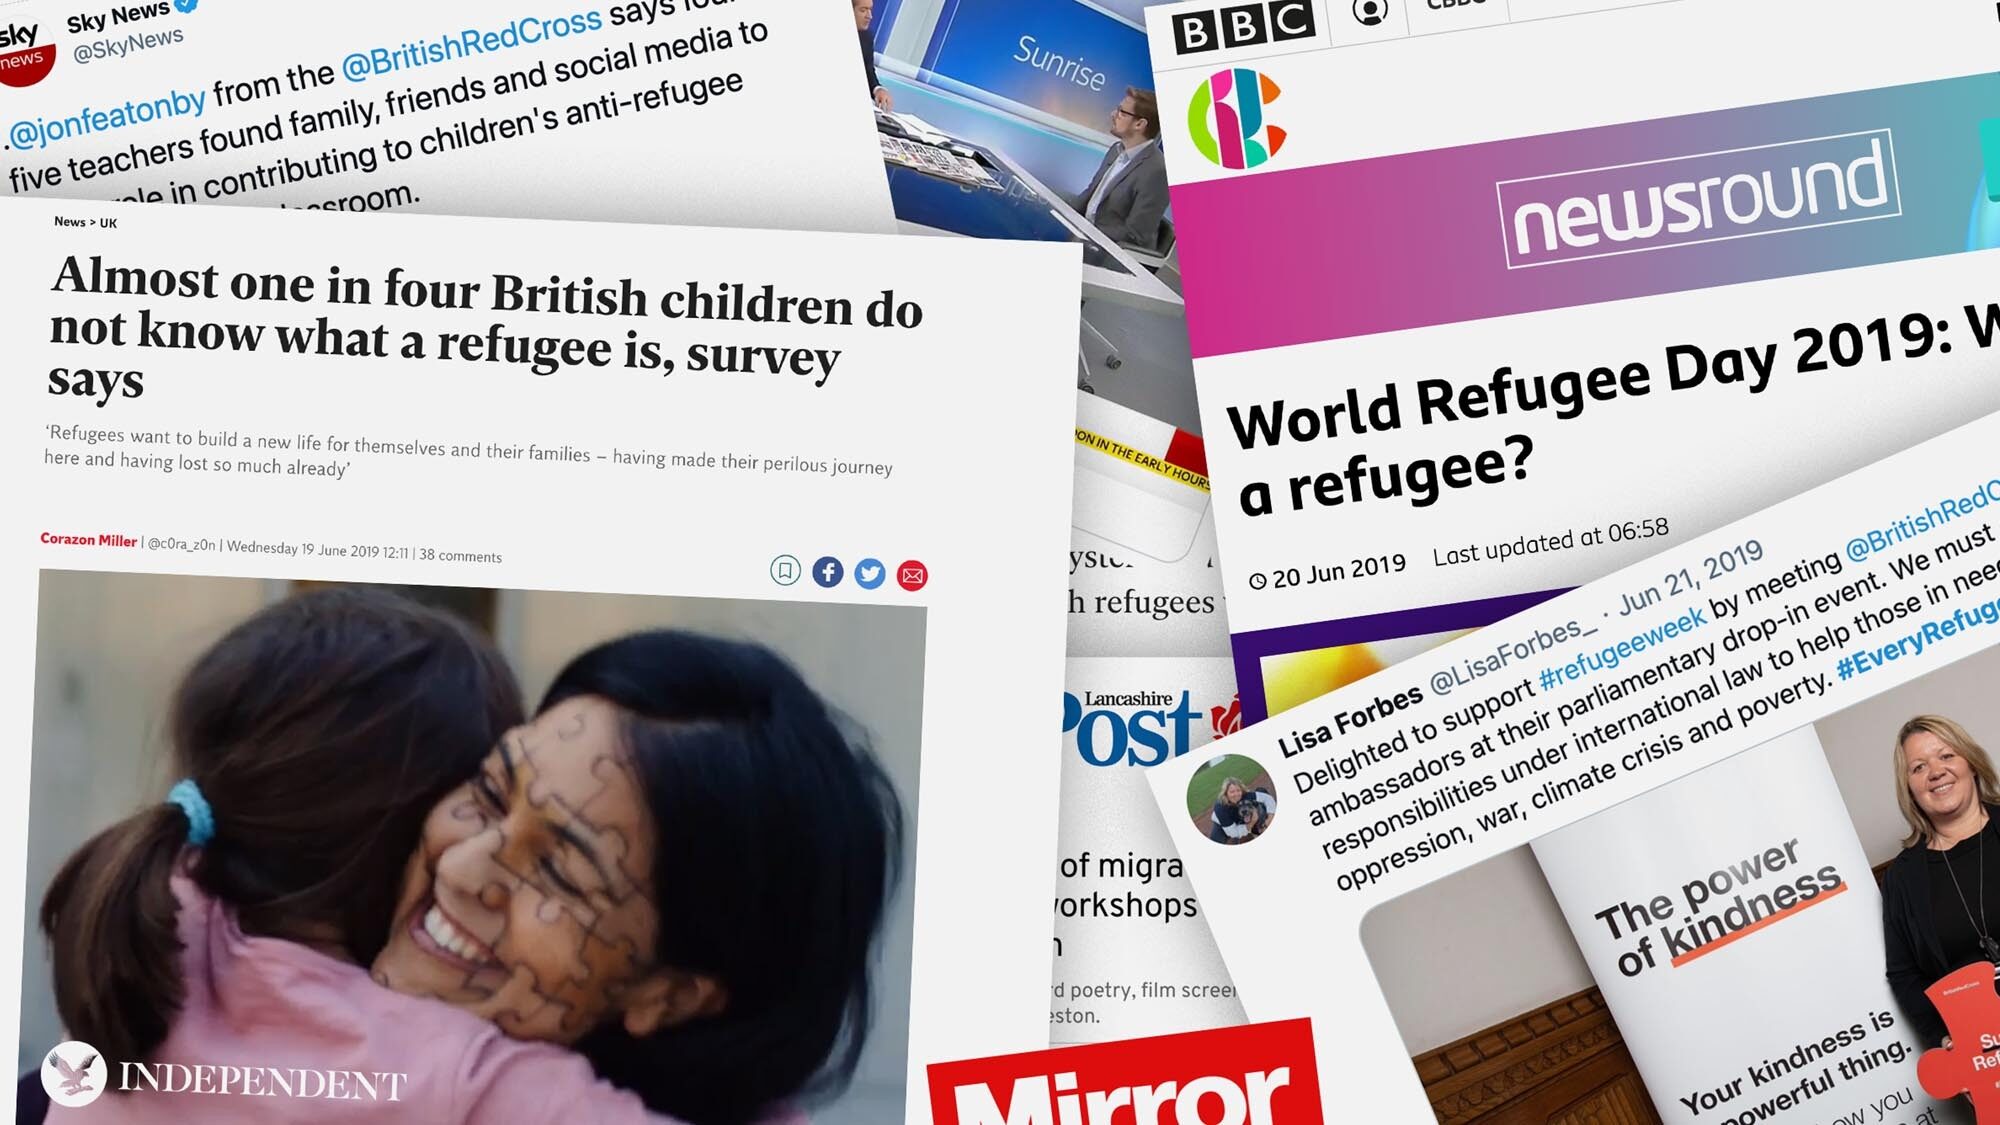 Collage of newspaper clippings from British Red Cross #RefugeeWeek video campaign